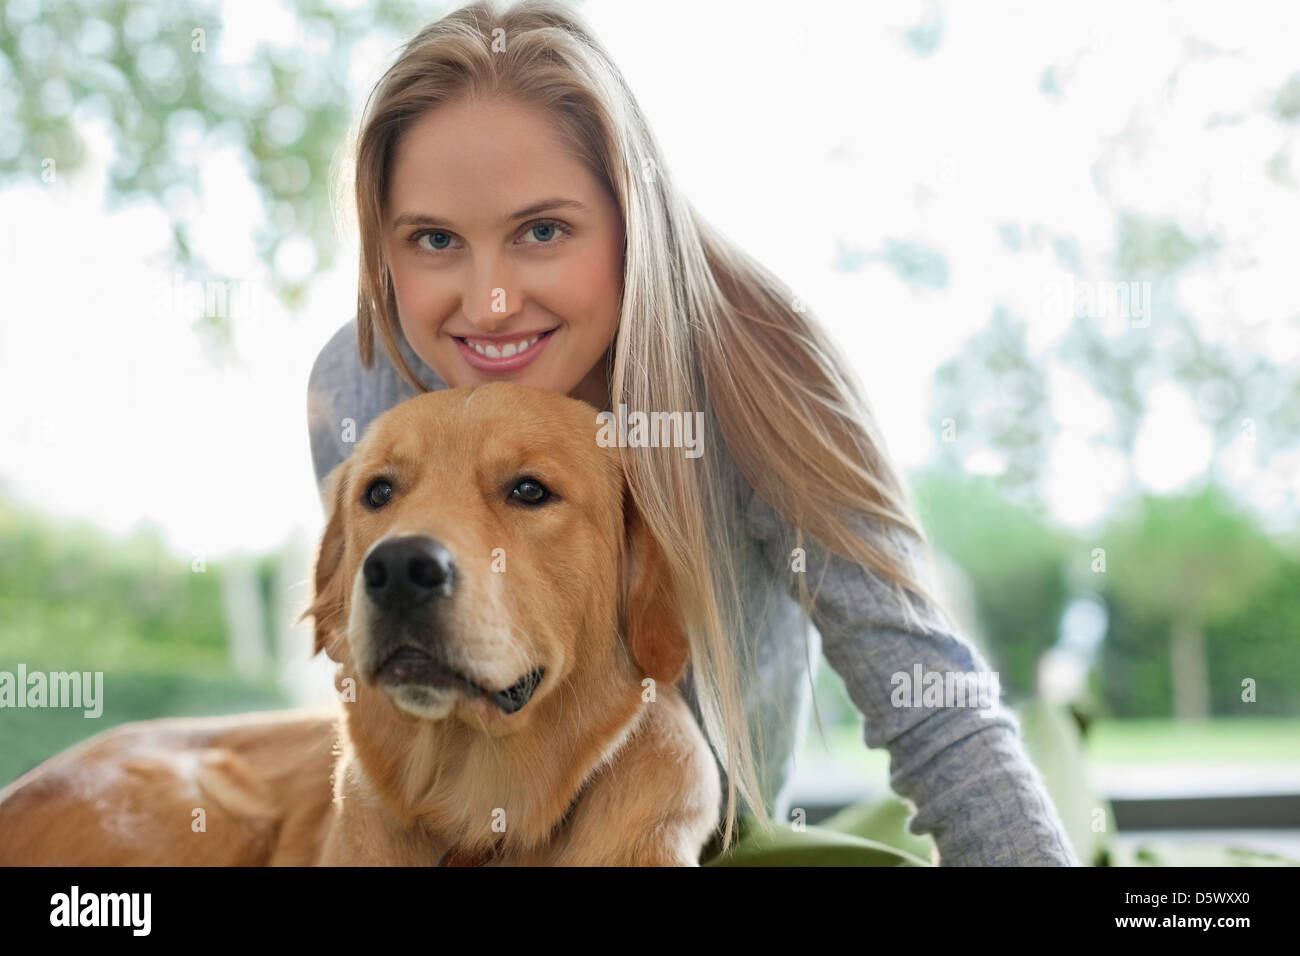 Woman relaxing with dog indoors Stock Photo